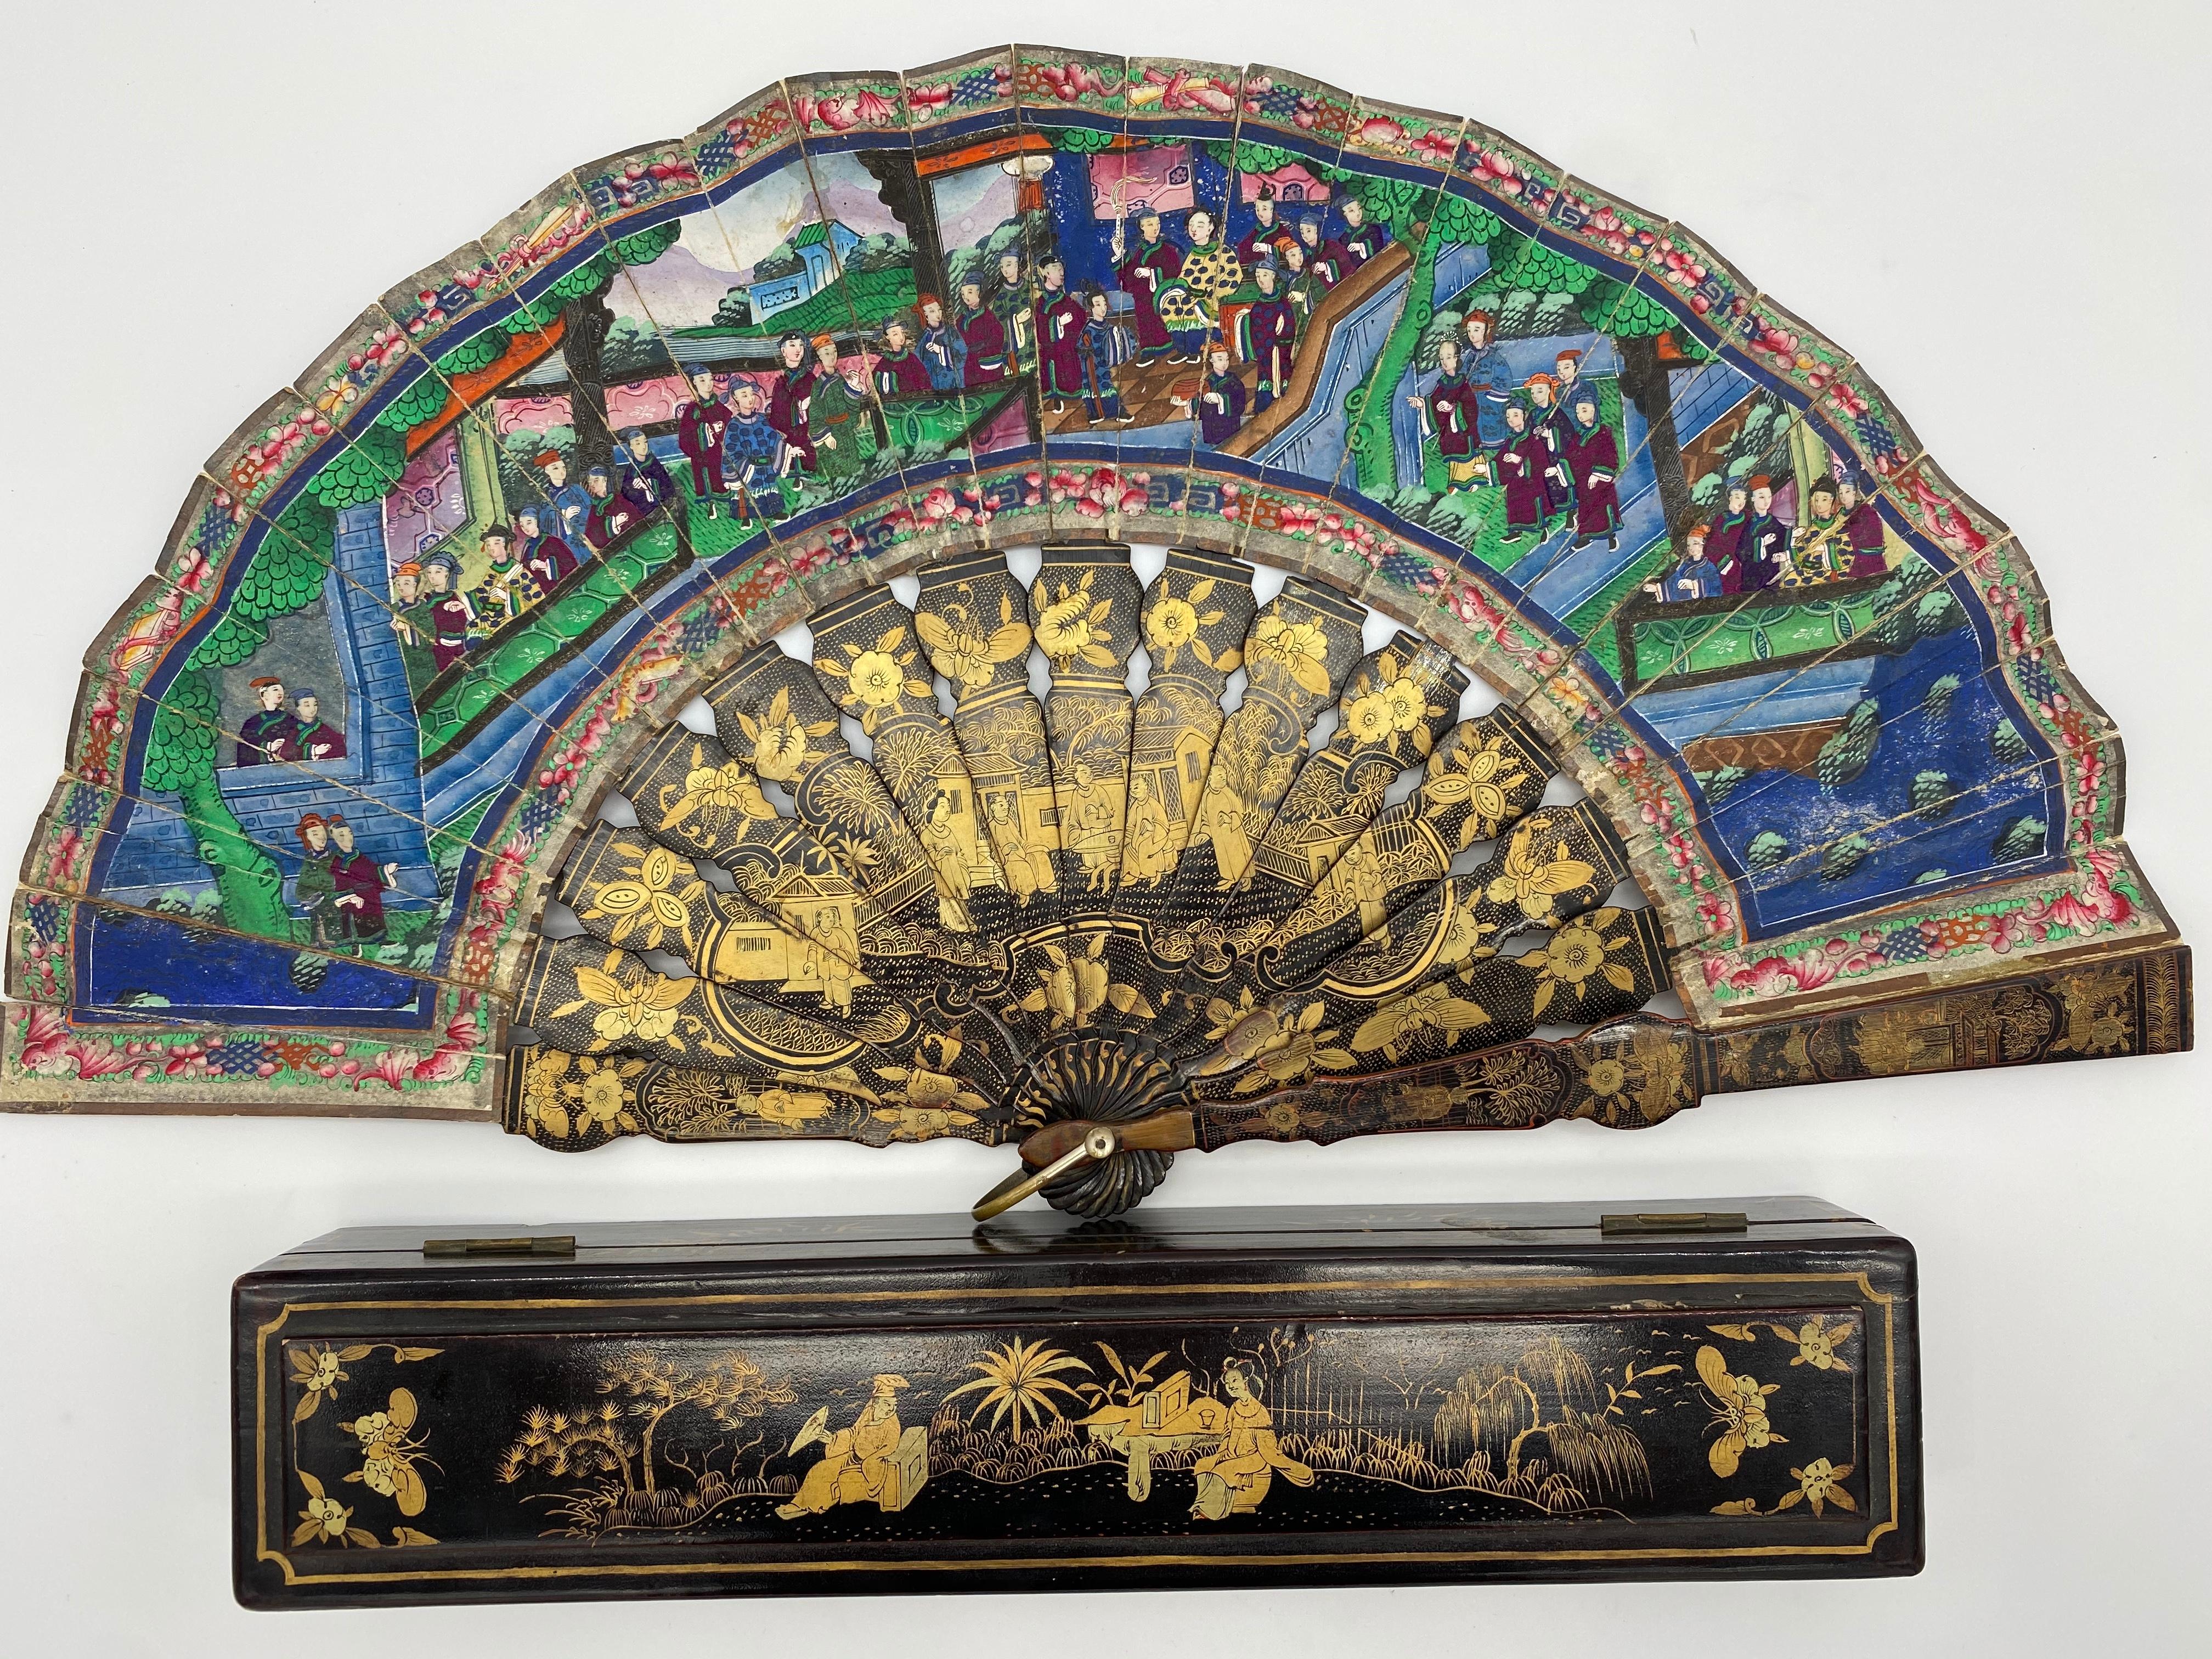 19th Century Chinese Gilt Lacquer Fan with Landscape 100 Faces 5